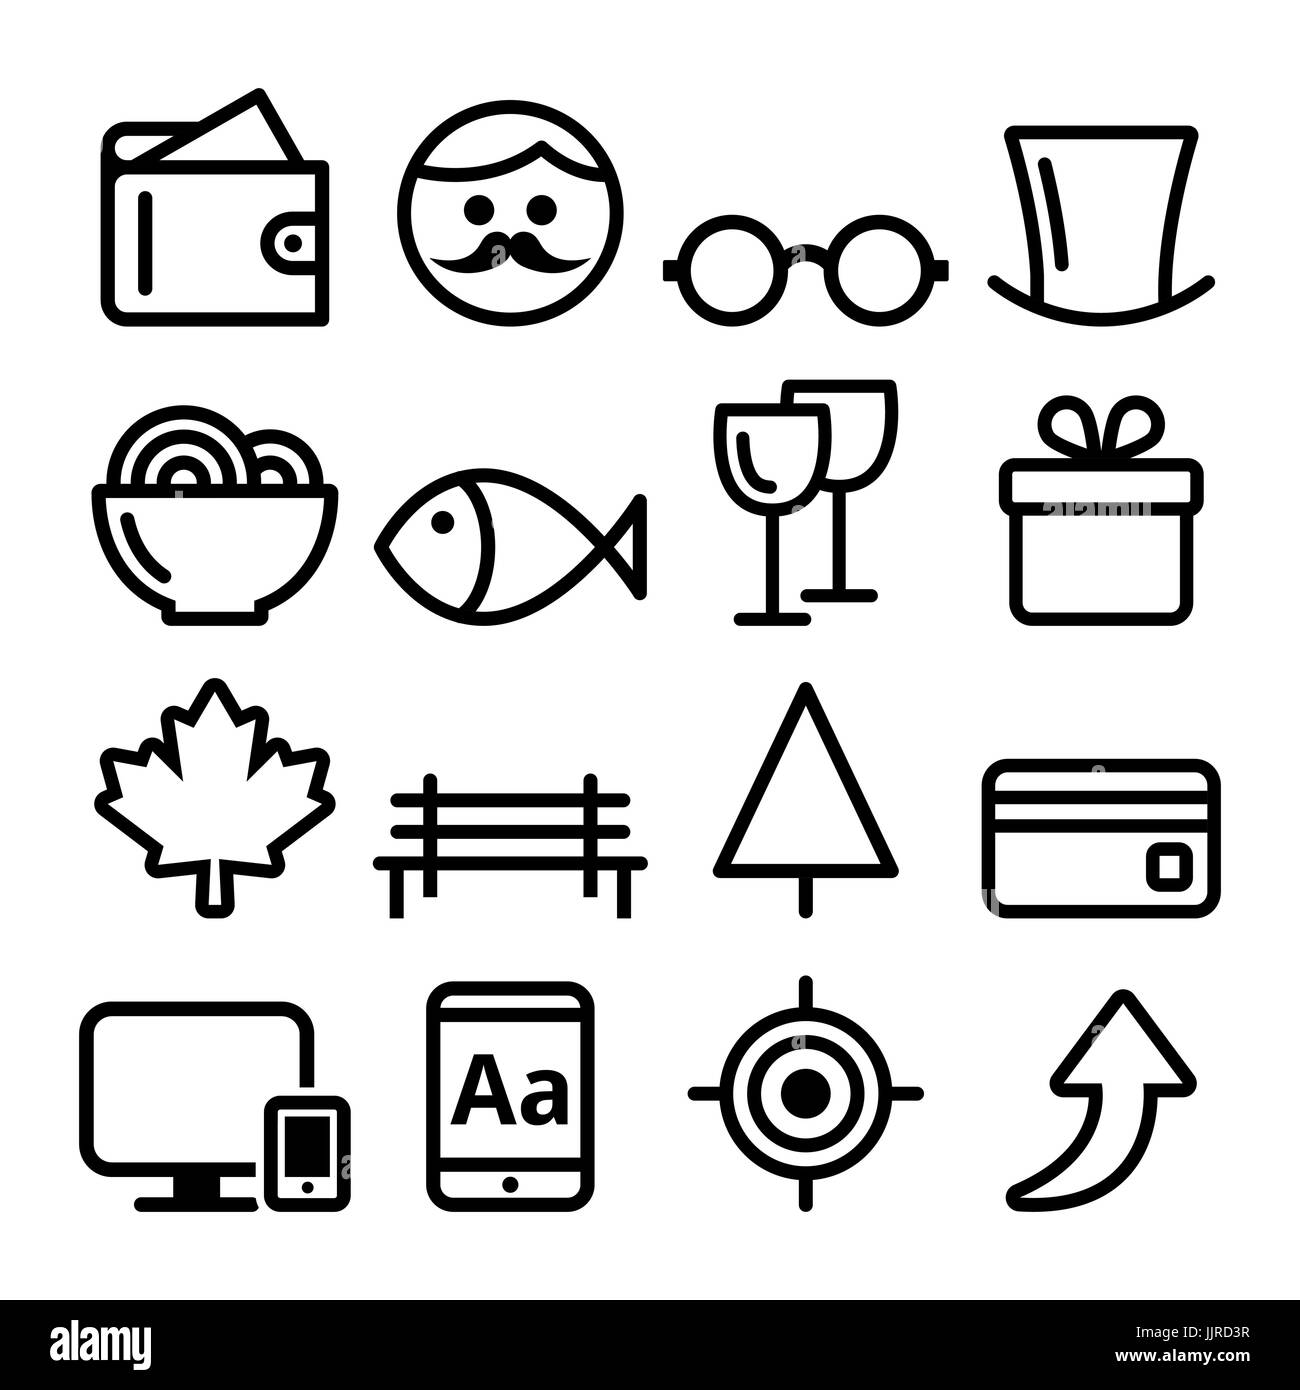 Web line icon set, Website navigation flat design icon collection Stock Vector